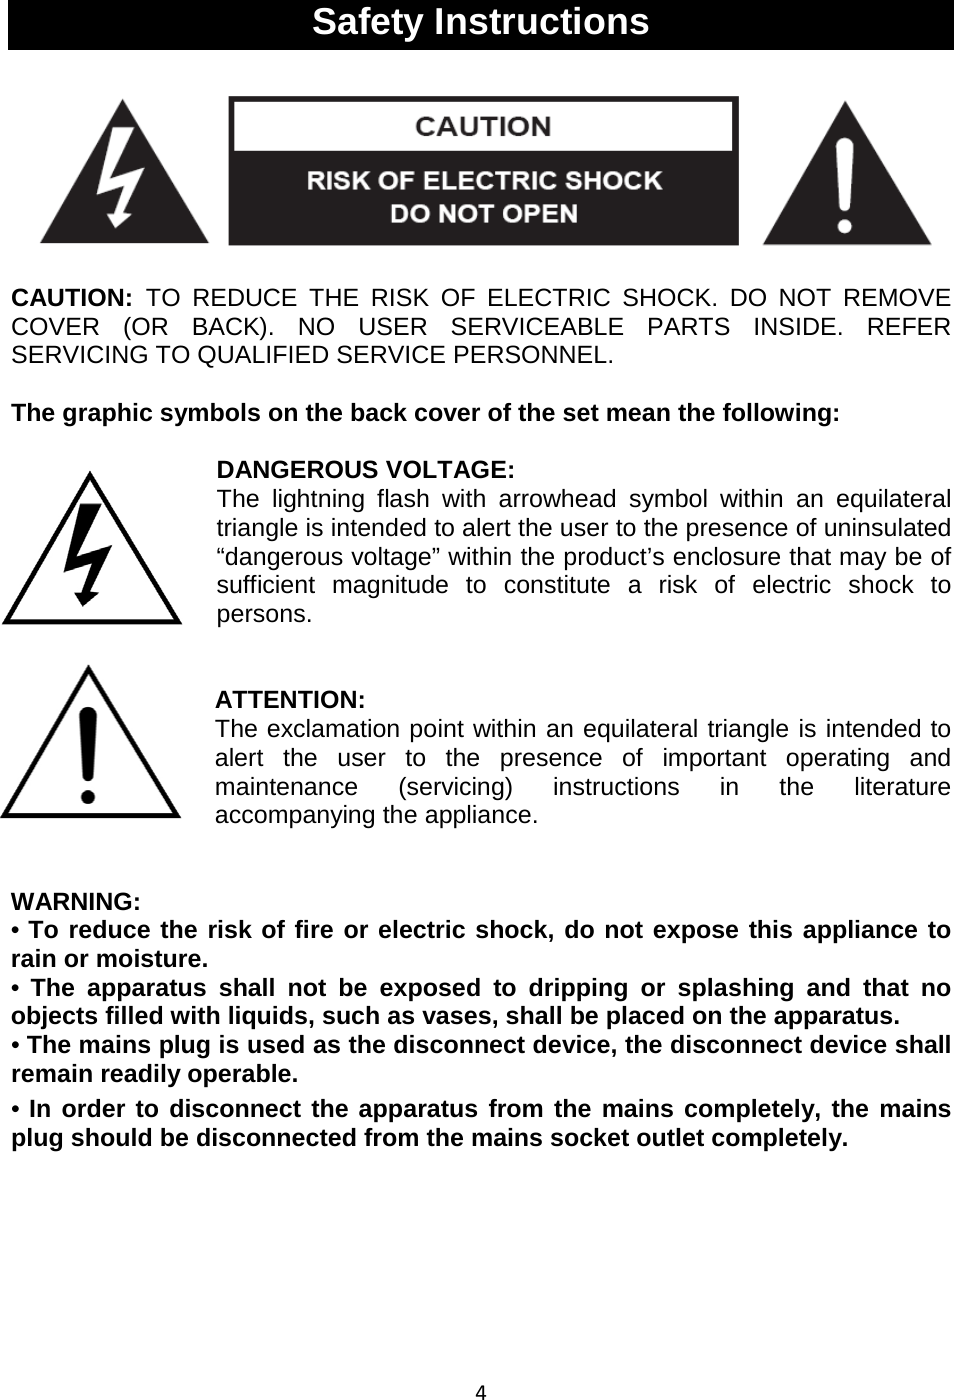 4   Safety Instructions  CAUTION: TO REDUCE THE RISK OF ELECTRIC SHOCK. DO NOT REMOVE COVER (OR BACK). NO USER SERVICEABLE PARTS INSIDE. REFER SERVICING TO QUALIFIED SERVICE PERSONNEL.  The graphic symbols on the back cover of the set mean the following:  DANGEROUS VOLTAGE: The lightning flash with arrowhead symbol within an equilateral triangle is intended to alert the user to the presence of uninsulated “dangerous voltage” within the product’s enclosure that may be of sufficient magnitude to constitute a risk of electric shock to persons.   ATTENTION: The exclamation point within an equilateral triangle is intended to alert the user to the presence of important operating and maintenance (servicing) instructions in the literature accompanying the appliance.    WARNING: • To reduce the risk of fire or electric shock, do not expose this appliance to rain or moisture. •  The apparatus shall not be exposed to dripping or splashing and that no objects filled with liquids, such as vases, shall be placed on the apparatus. • The mains plug is used as the disconnect device, the disconnect device shall remain readily operable. • In order to disconnect the apparatus from the mains completely, the mains plug should be disconnected from the mains socket outlet completely.        